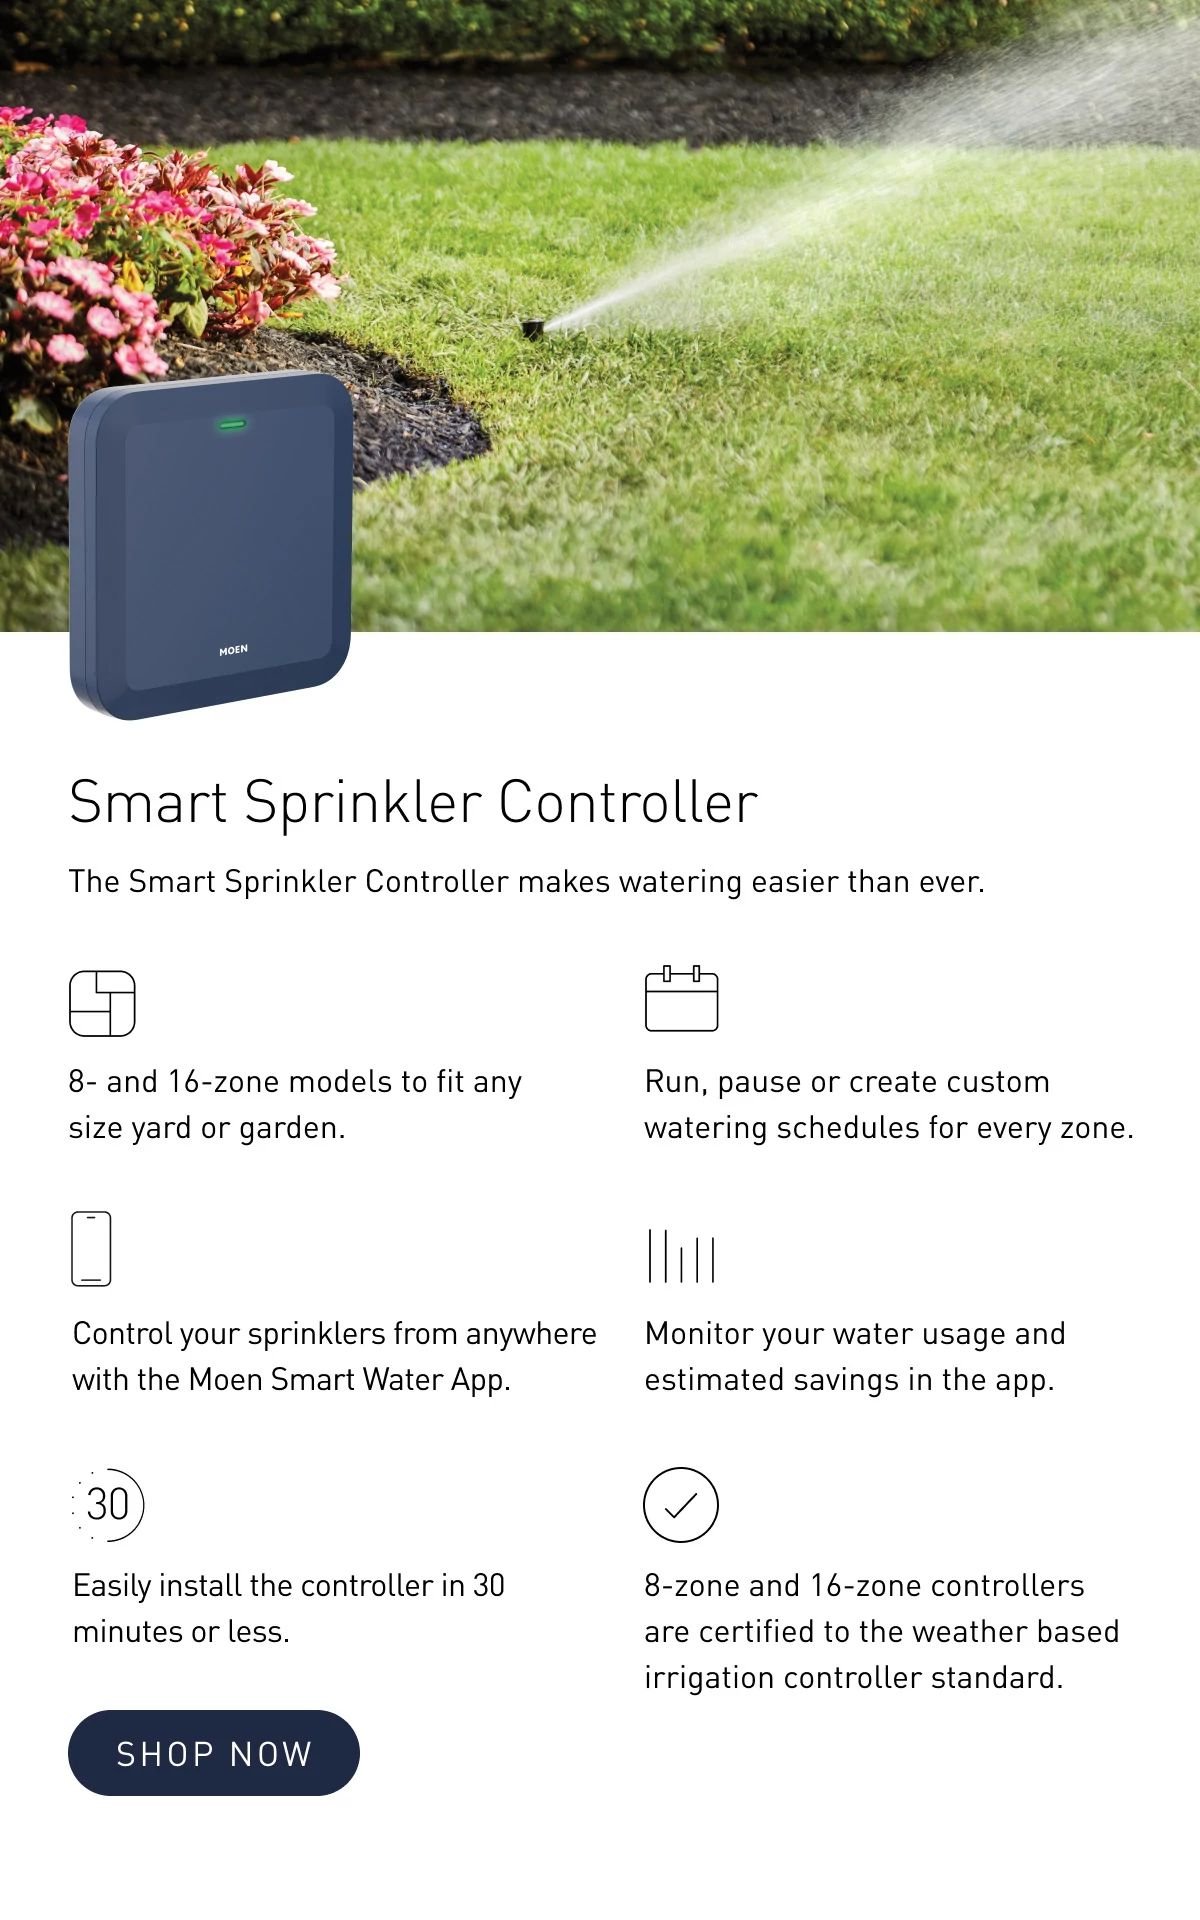 Moen’s Smart Irrigation products take the guesswork out of your watering routines, so your yard gets watered only when and where it’s needed. Discover how to get a greener lawn in no time.